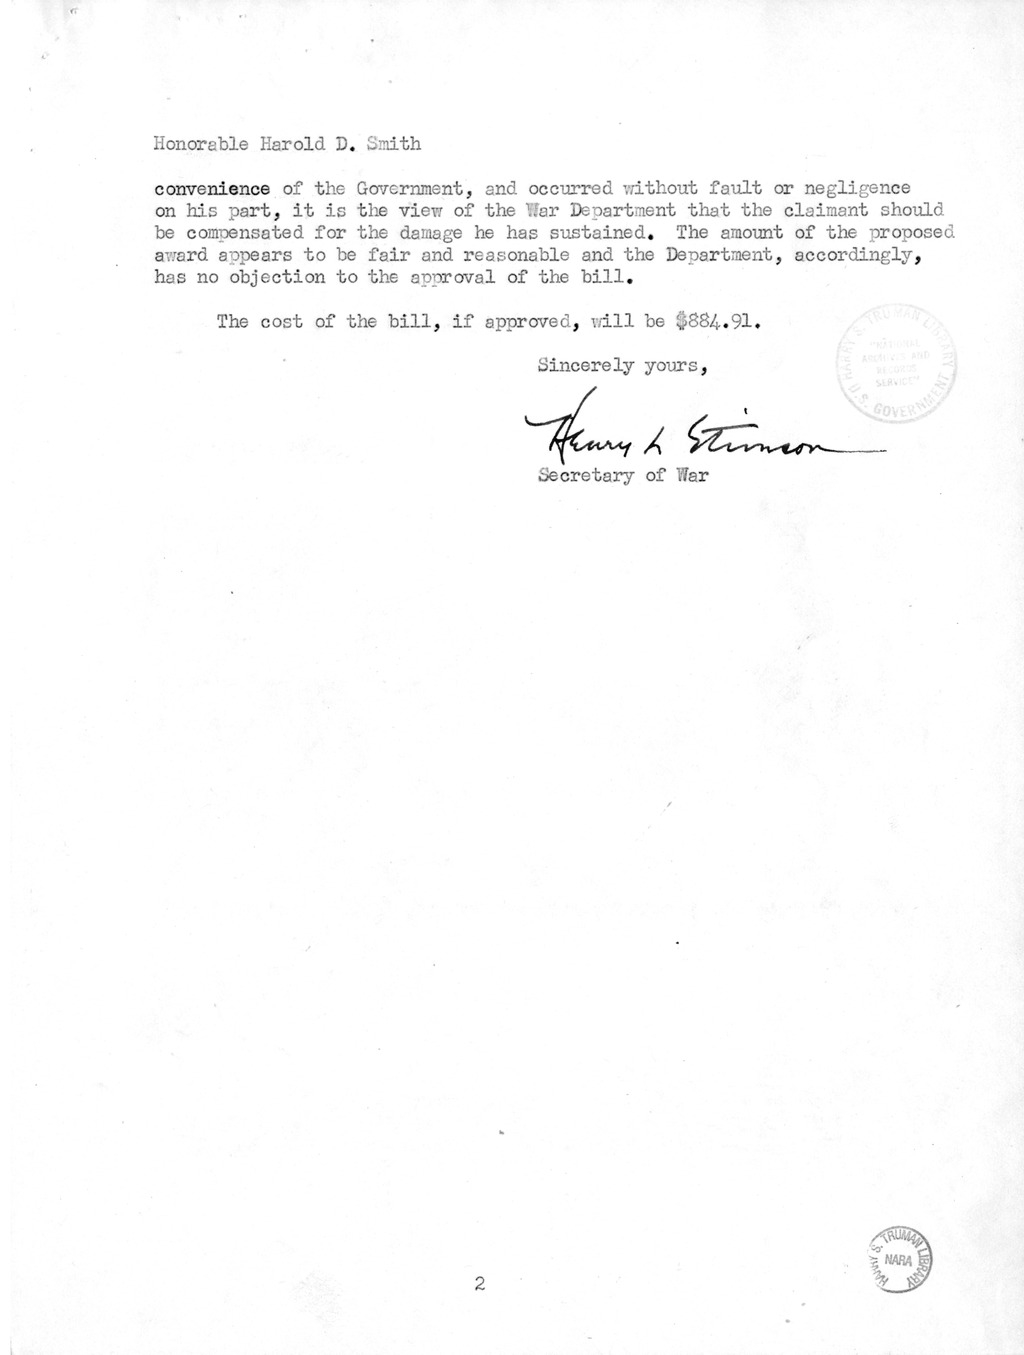 Memorandum from Frederick J. Bailey to M. C. Latta, H. R. 787, For the Relief of Murray B. Latimer, with Attachments